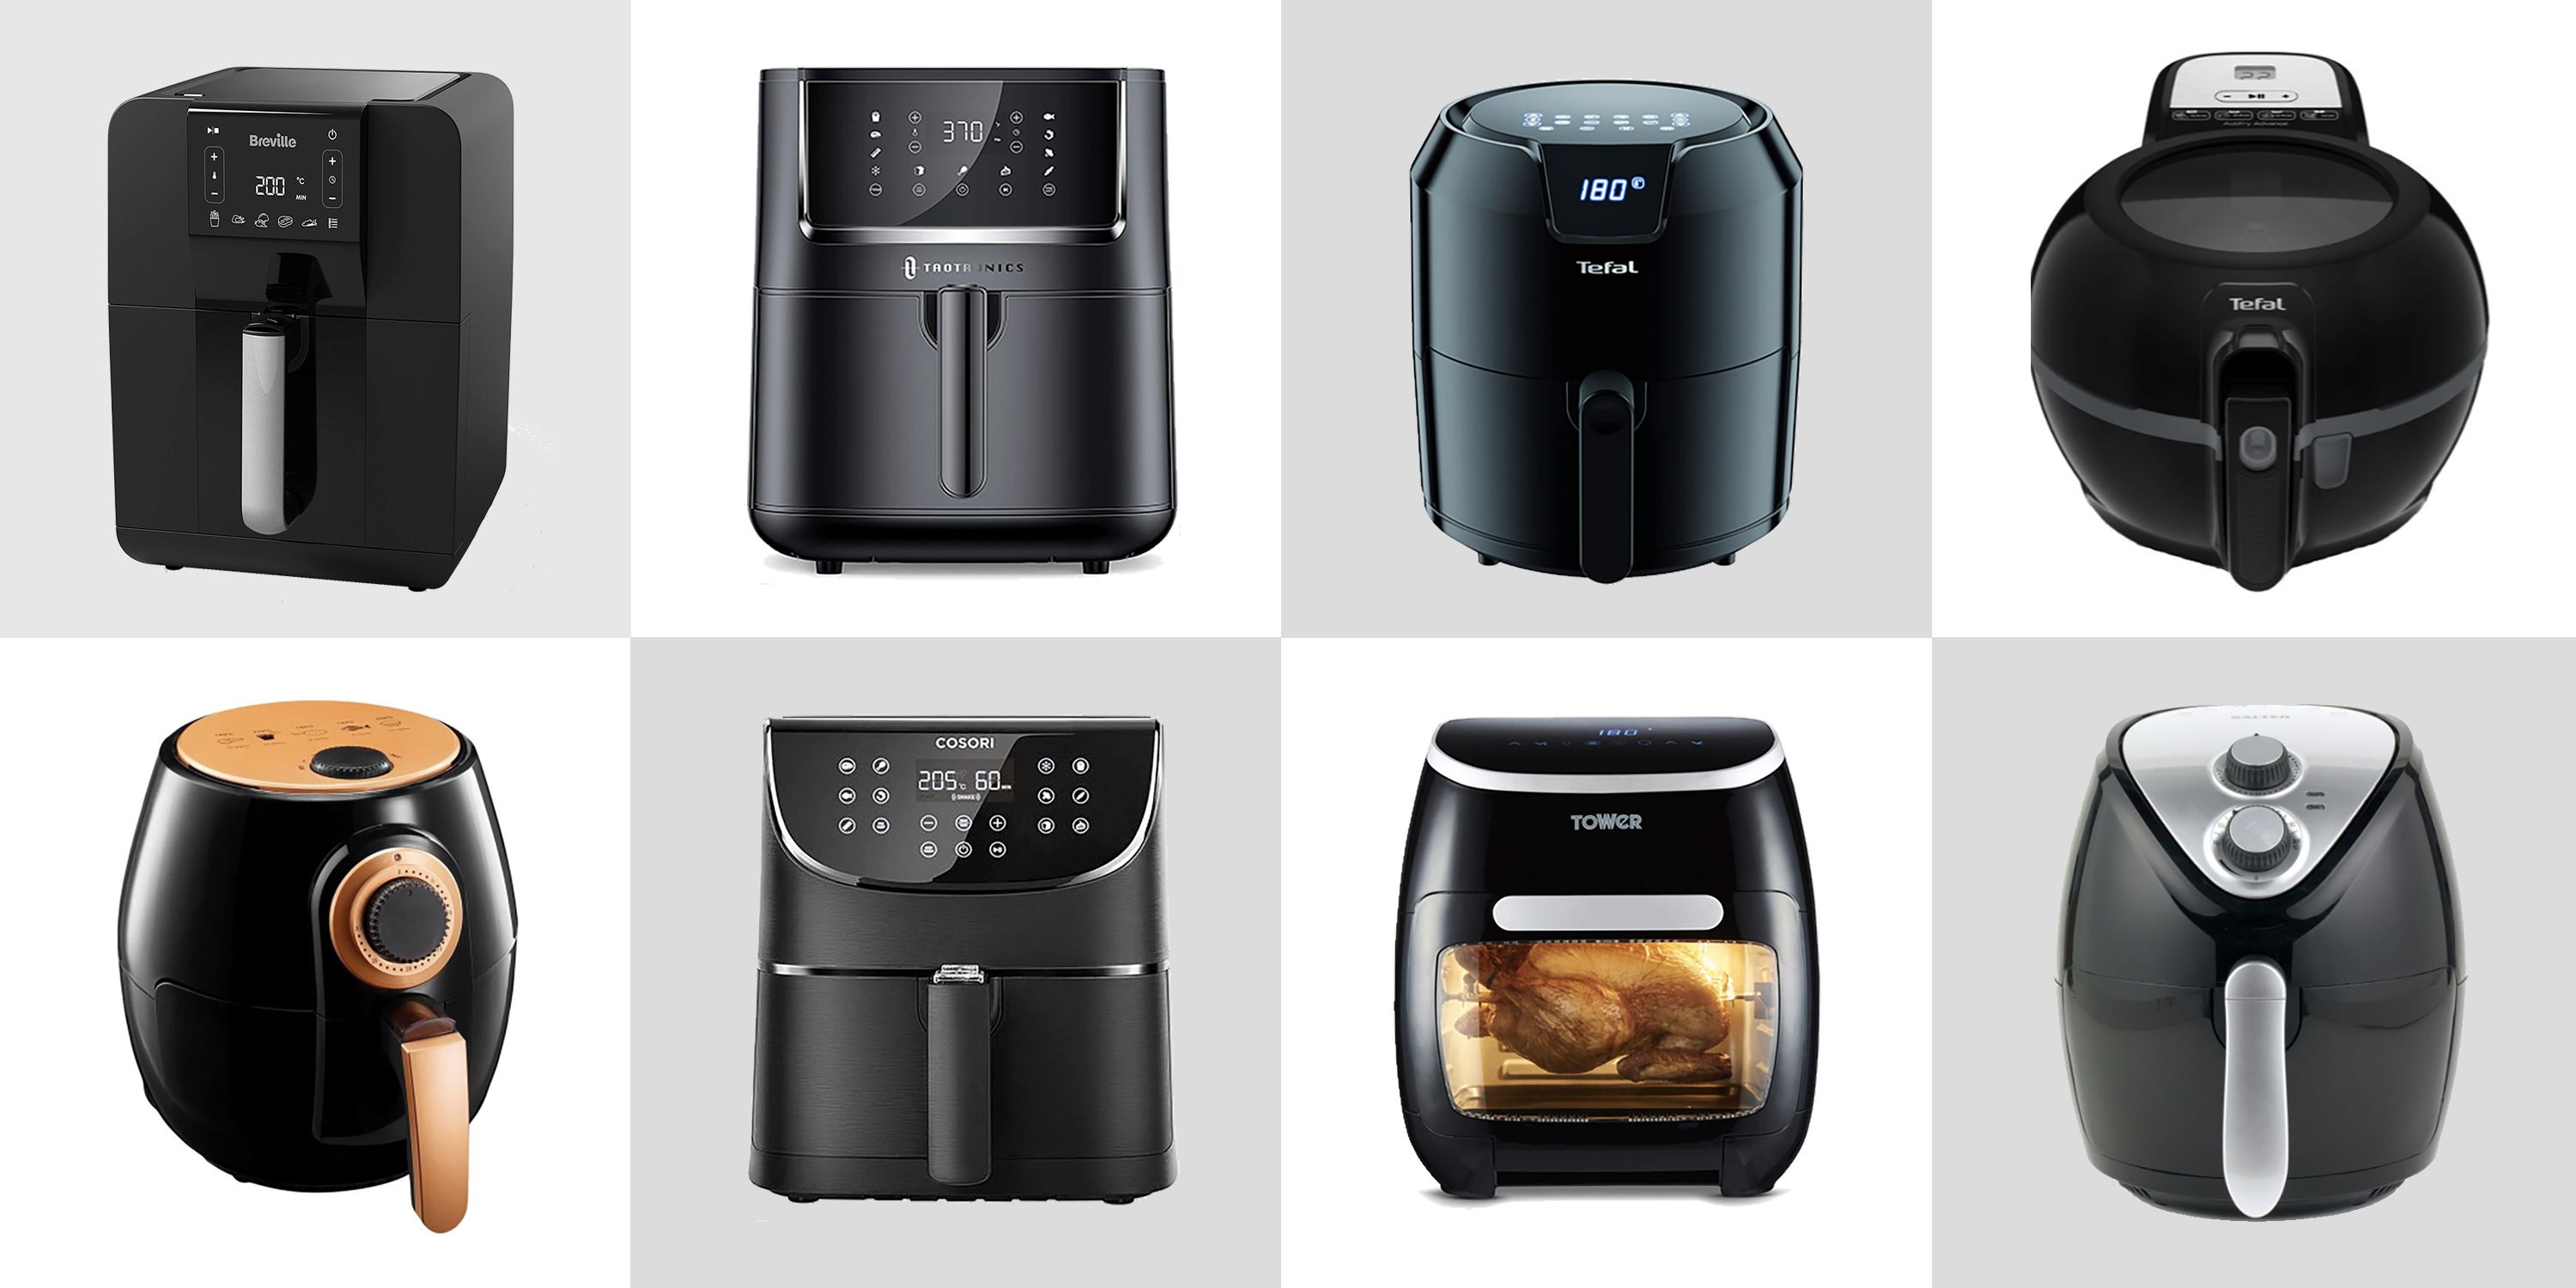 TaoTronics Air Fryer Large XL 6 Quart 1750W Oven with Touch Control Panel